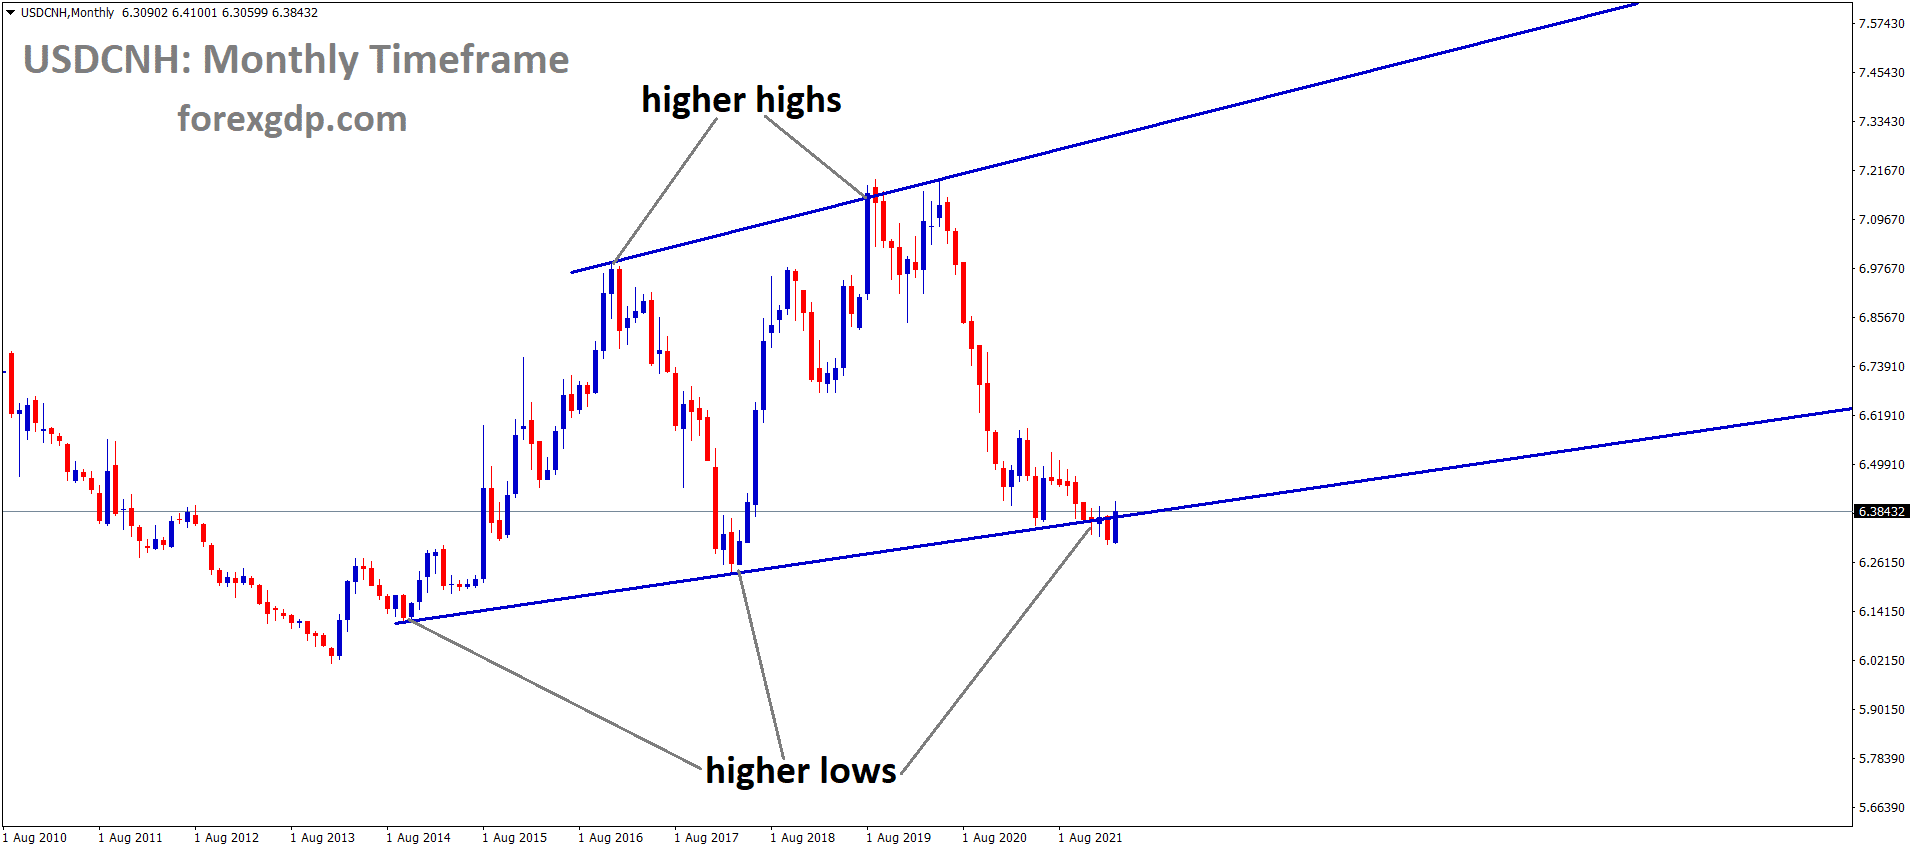 USDCNH Monthly time Frame Market has reached the higher low area of the Ascending channel Pattern.